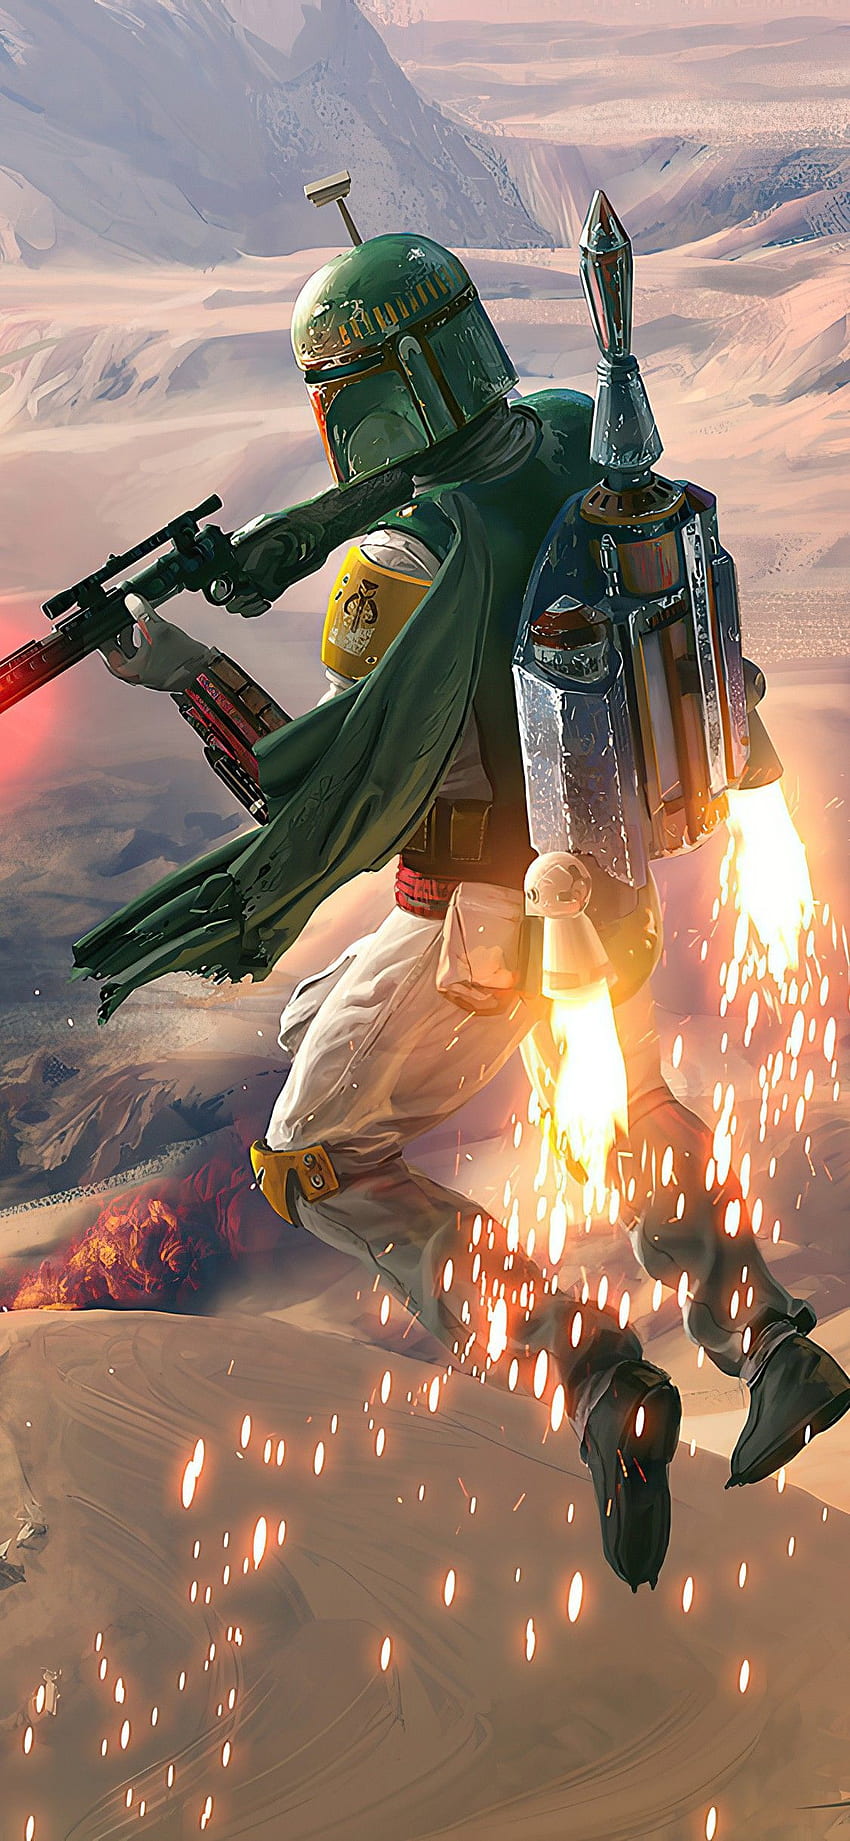 Boba Fett for mobile phone, tablet, computer and other devices and . Boba fett , Star wars , Star wars empire, LEGO Boba Fett HD phone wallpaper